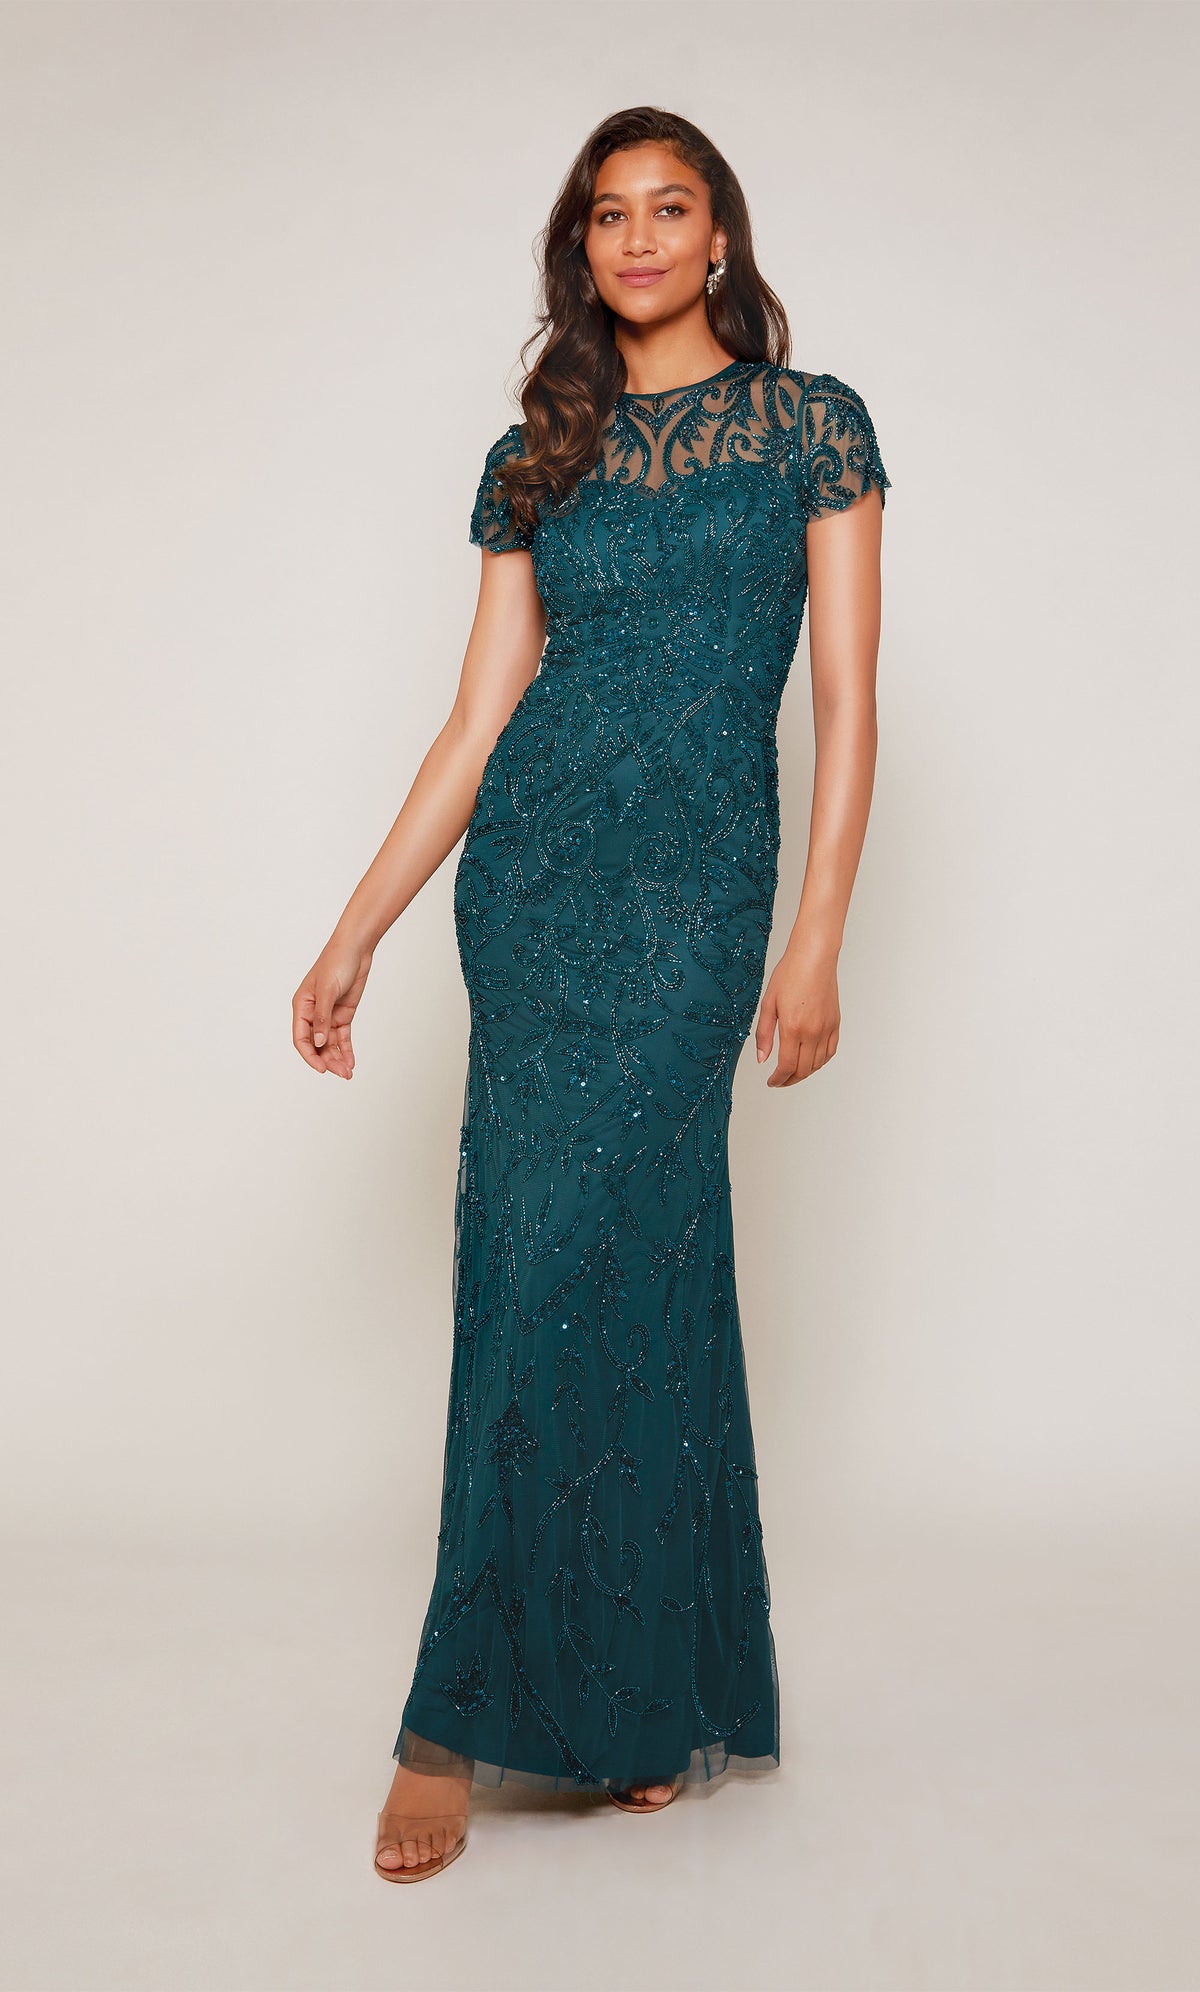 A floor length, hand-beaded evening gown with an illusion neckline and short sleeves in an dark green color called dragonfly.